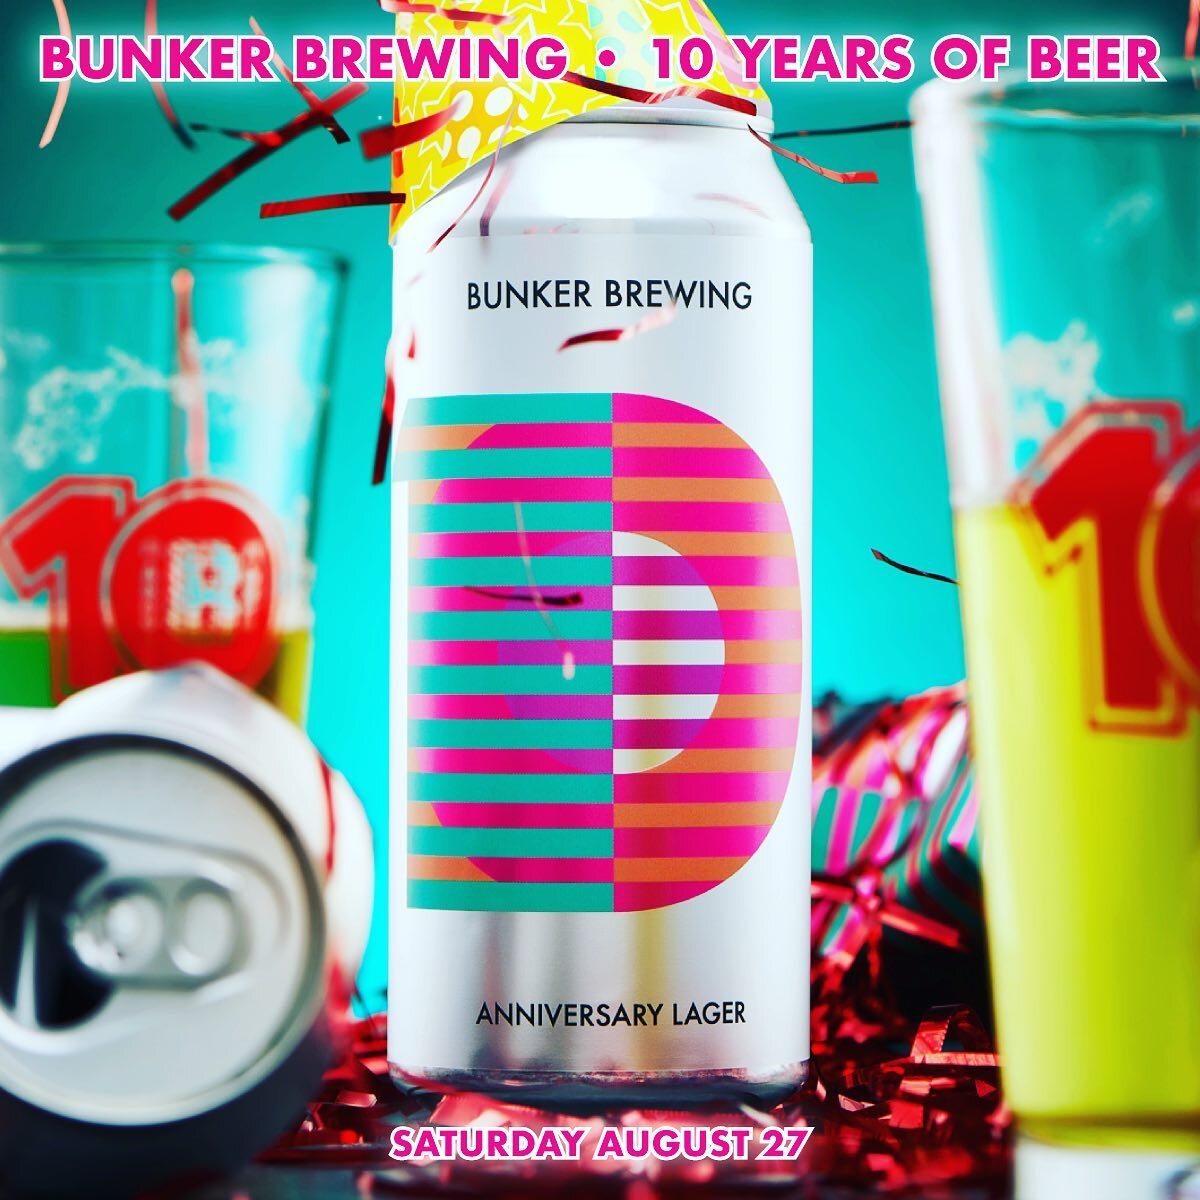 🎊🎊🎊🎊🎊🎊 
Please join us at Bunker this Saturday 8/27 as we celebrate 
10 YEARS OF BEERS! 
🎉 
We will be celebrating all day in the taproom with Live Tunes provided by The Maine Marimba Ensemble.
🎉 
@luckyloueats will be here with the Greek Str